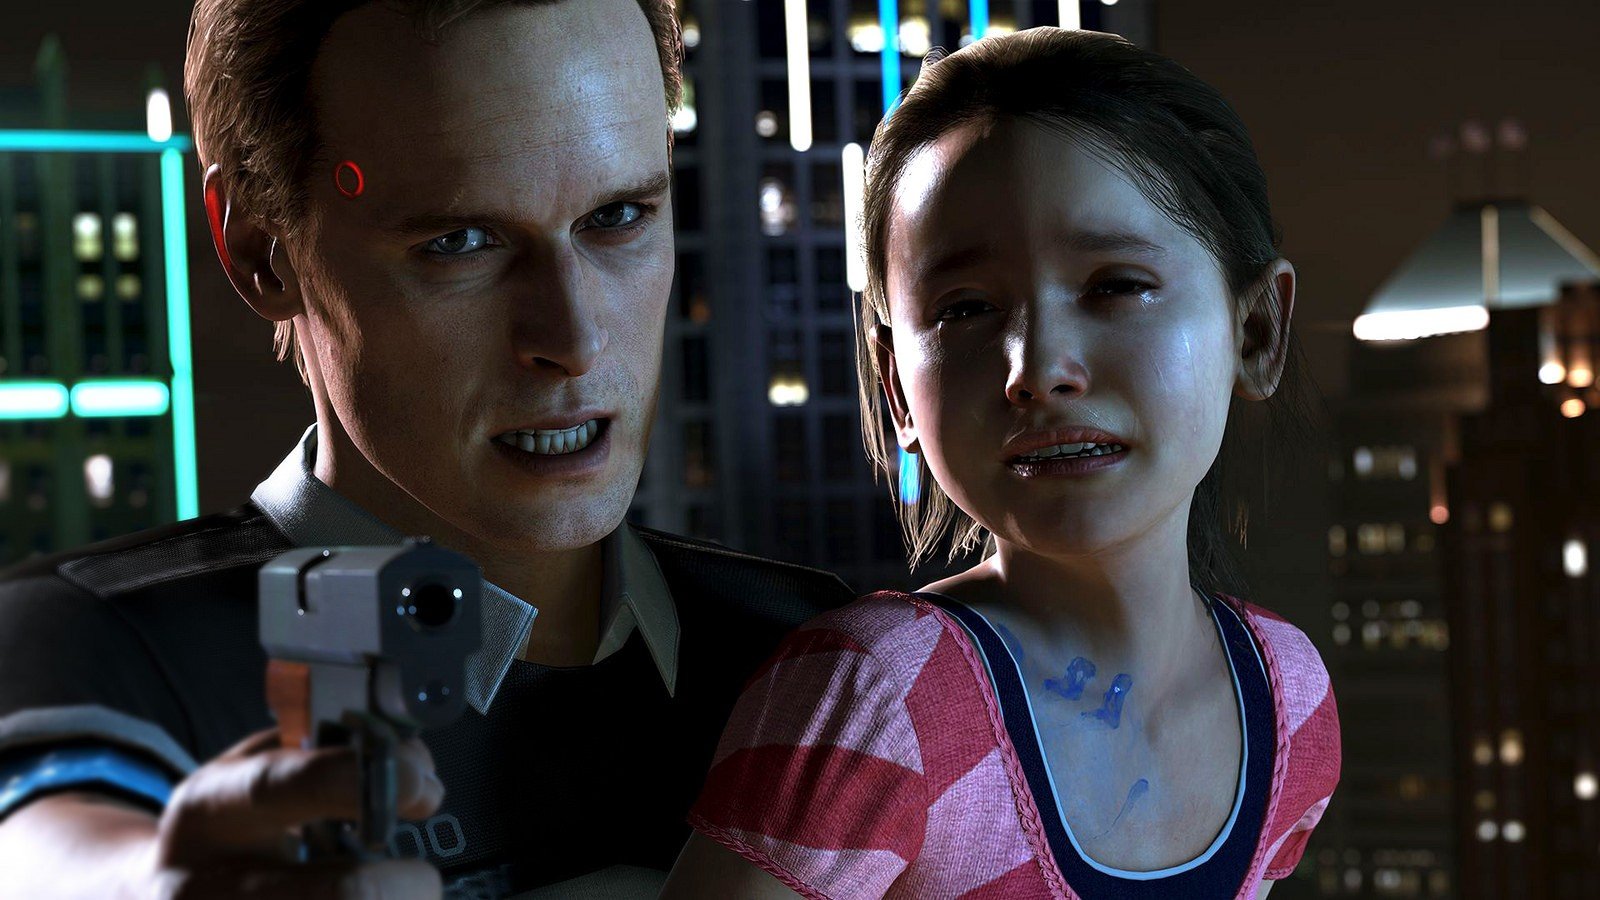 Detroit: Become Human review: Grey's Anatomy's Jesse Williams stars